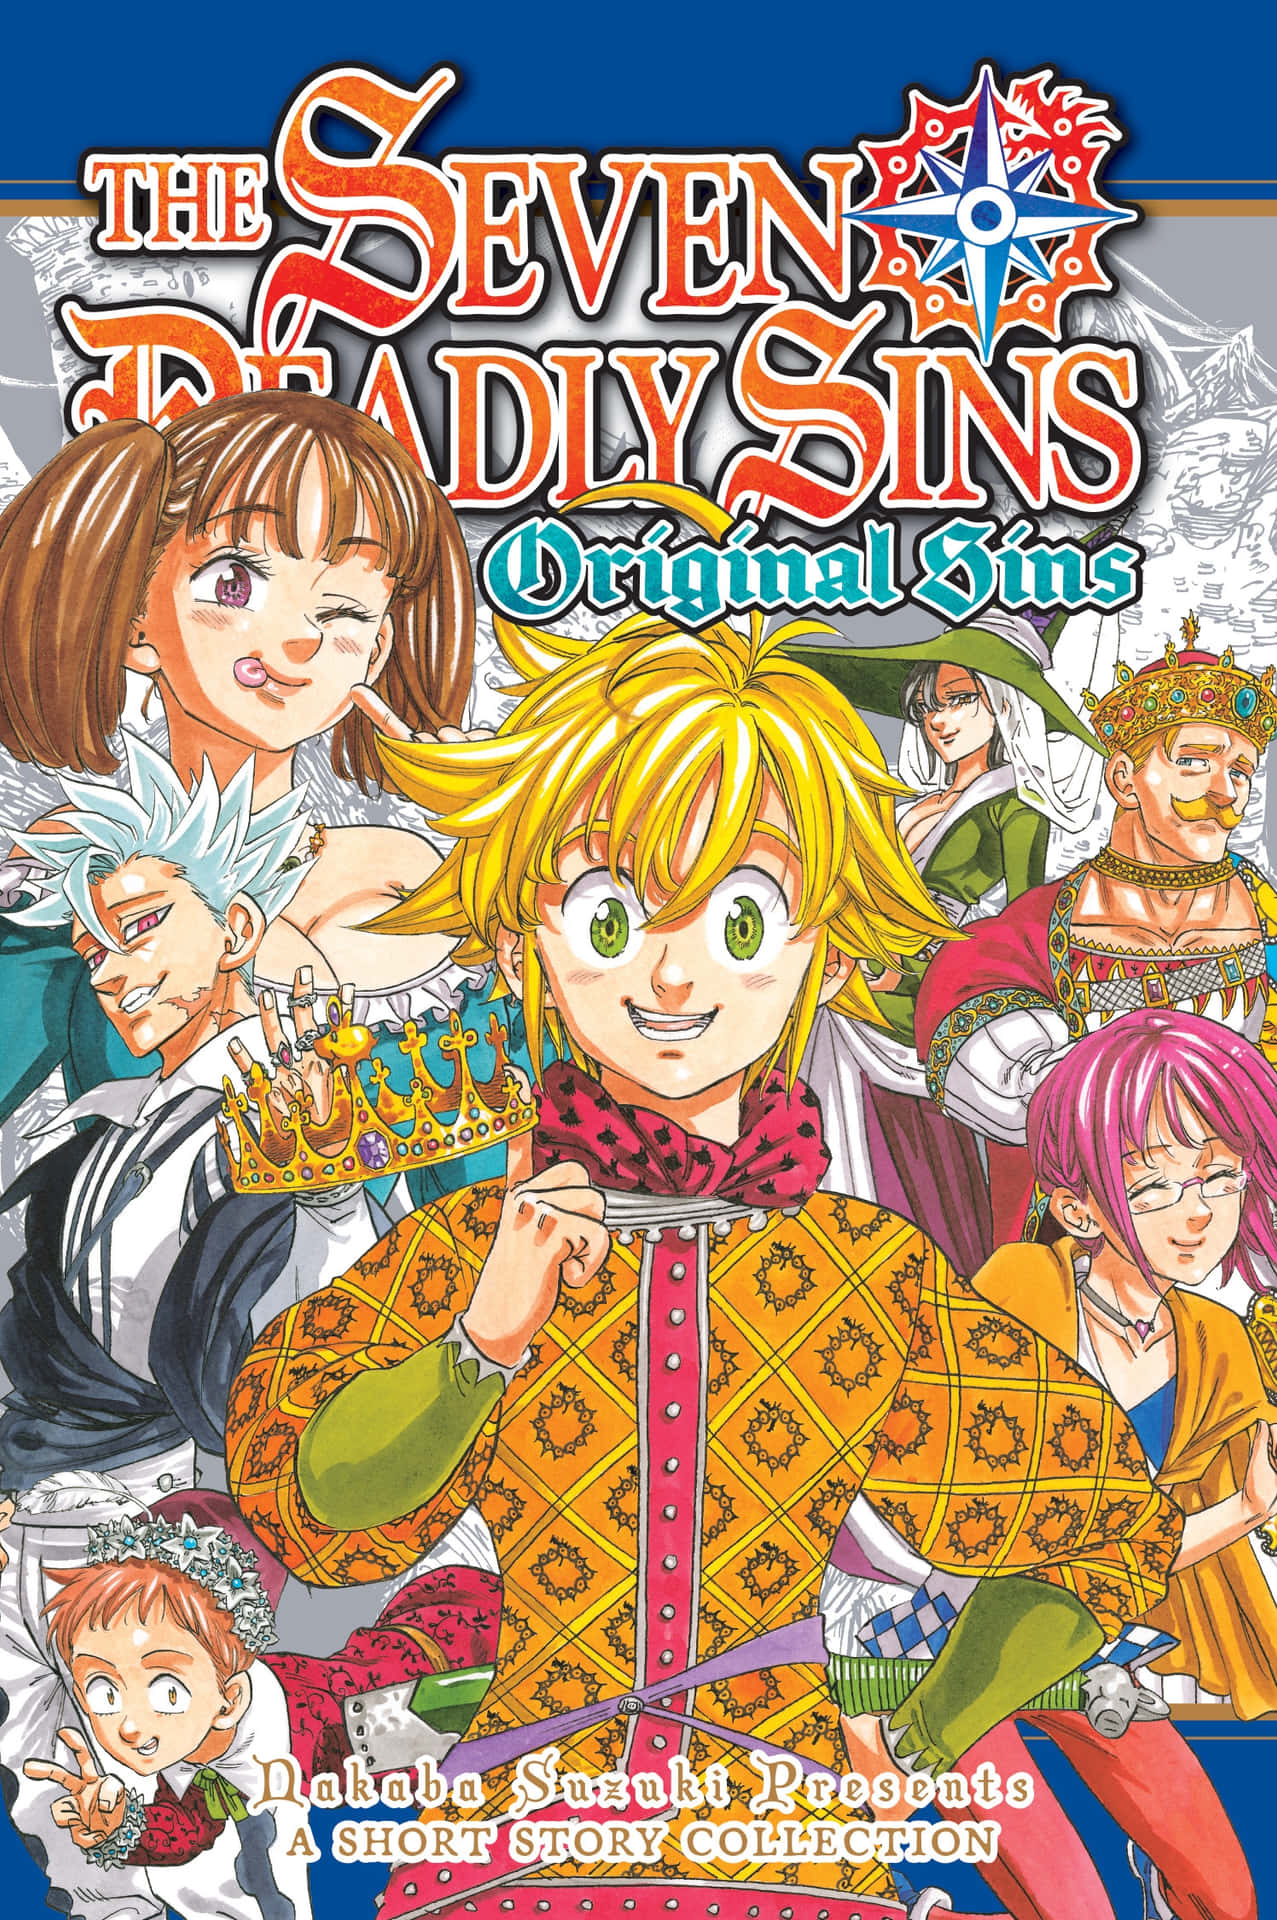 Brace yourself for the consequences of the Seven Deadly Sins